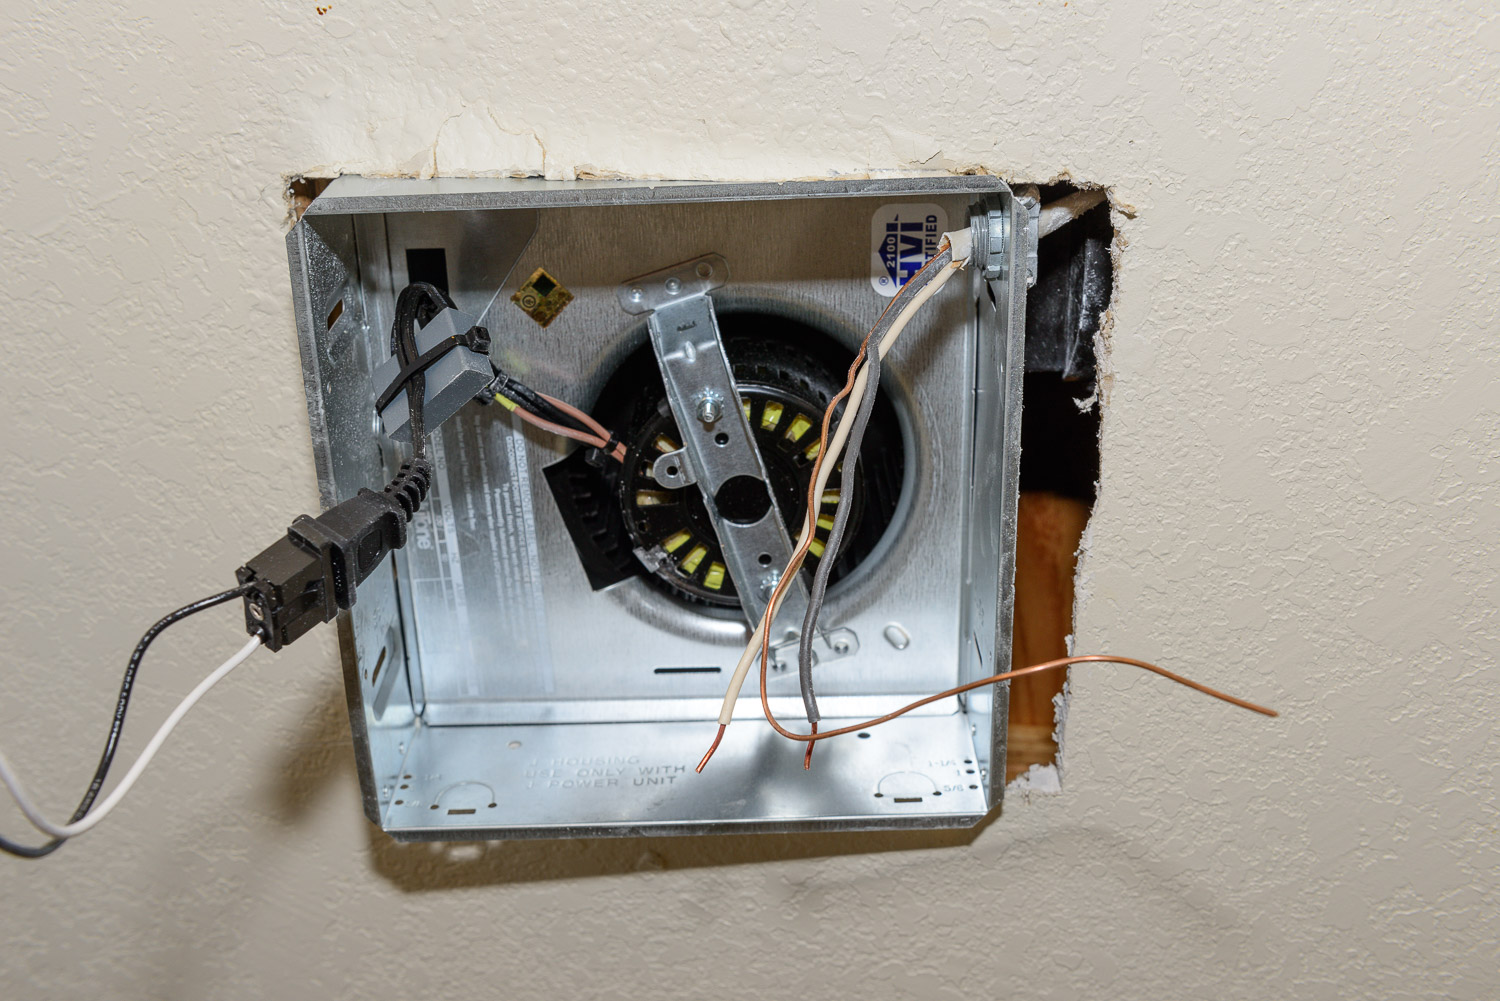 Push the fan up into place and feed the romex into the connector